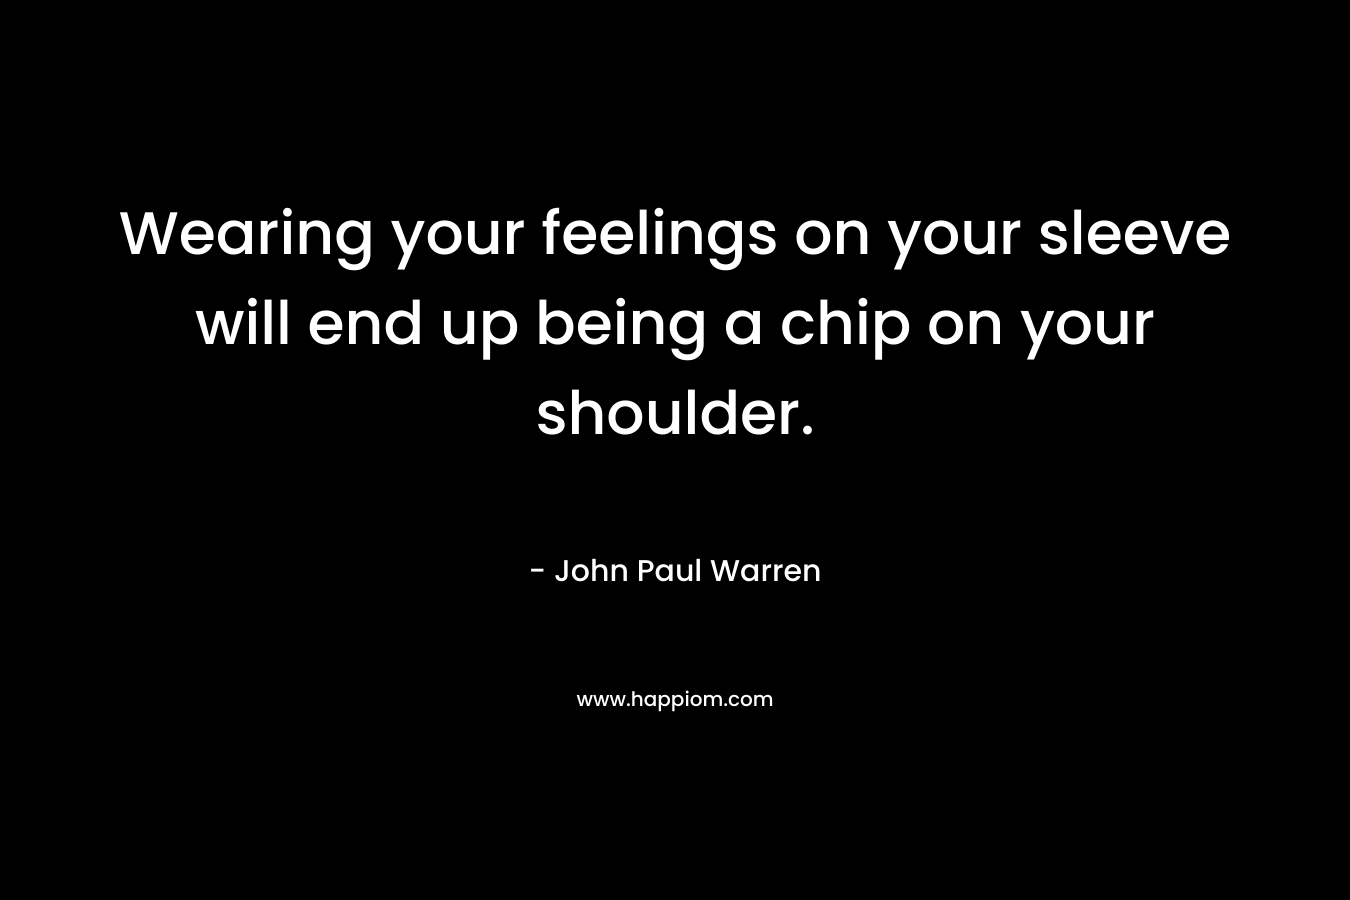 Wearing your feelings on your sleeve will end up being a chip on your shoulder.